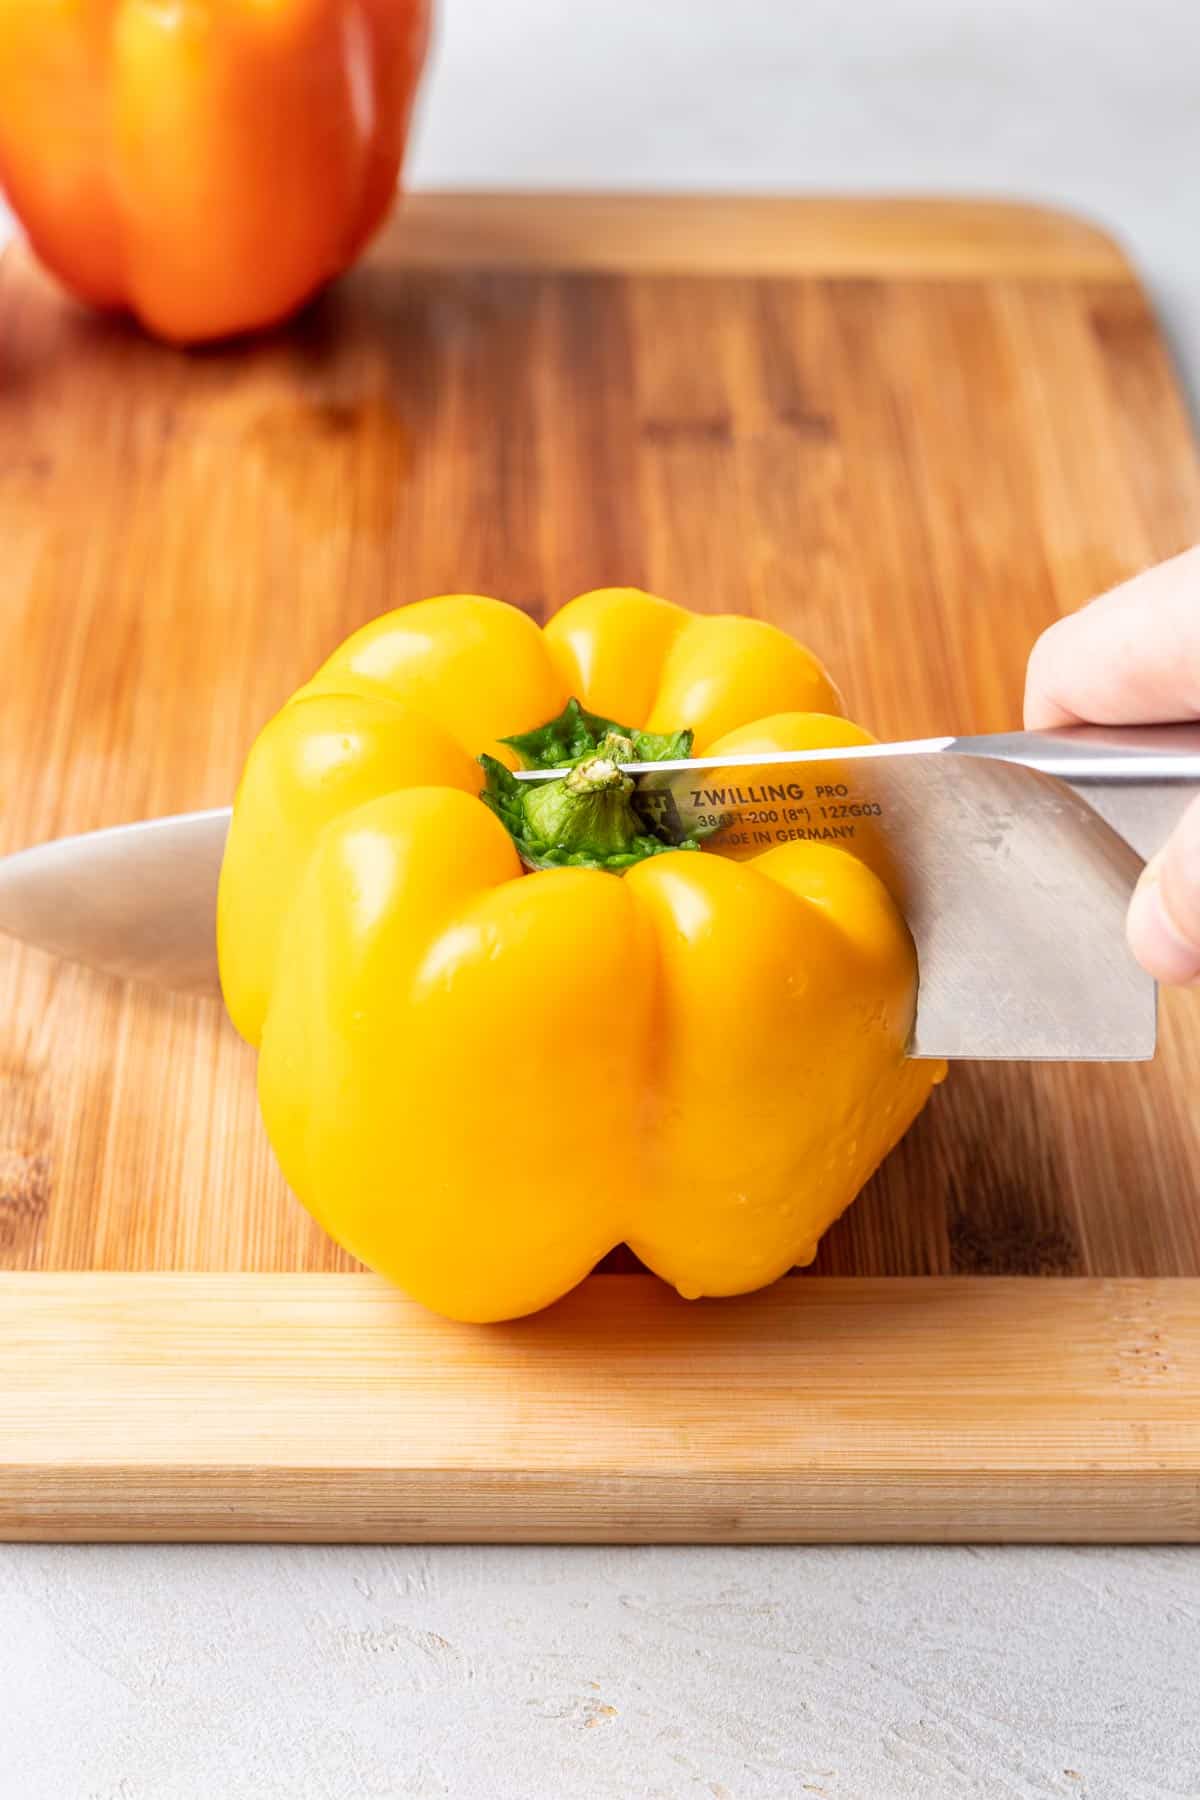 A chef's knife cutting a yellow bell pepper in half.